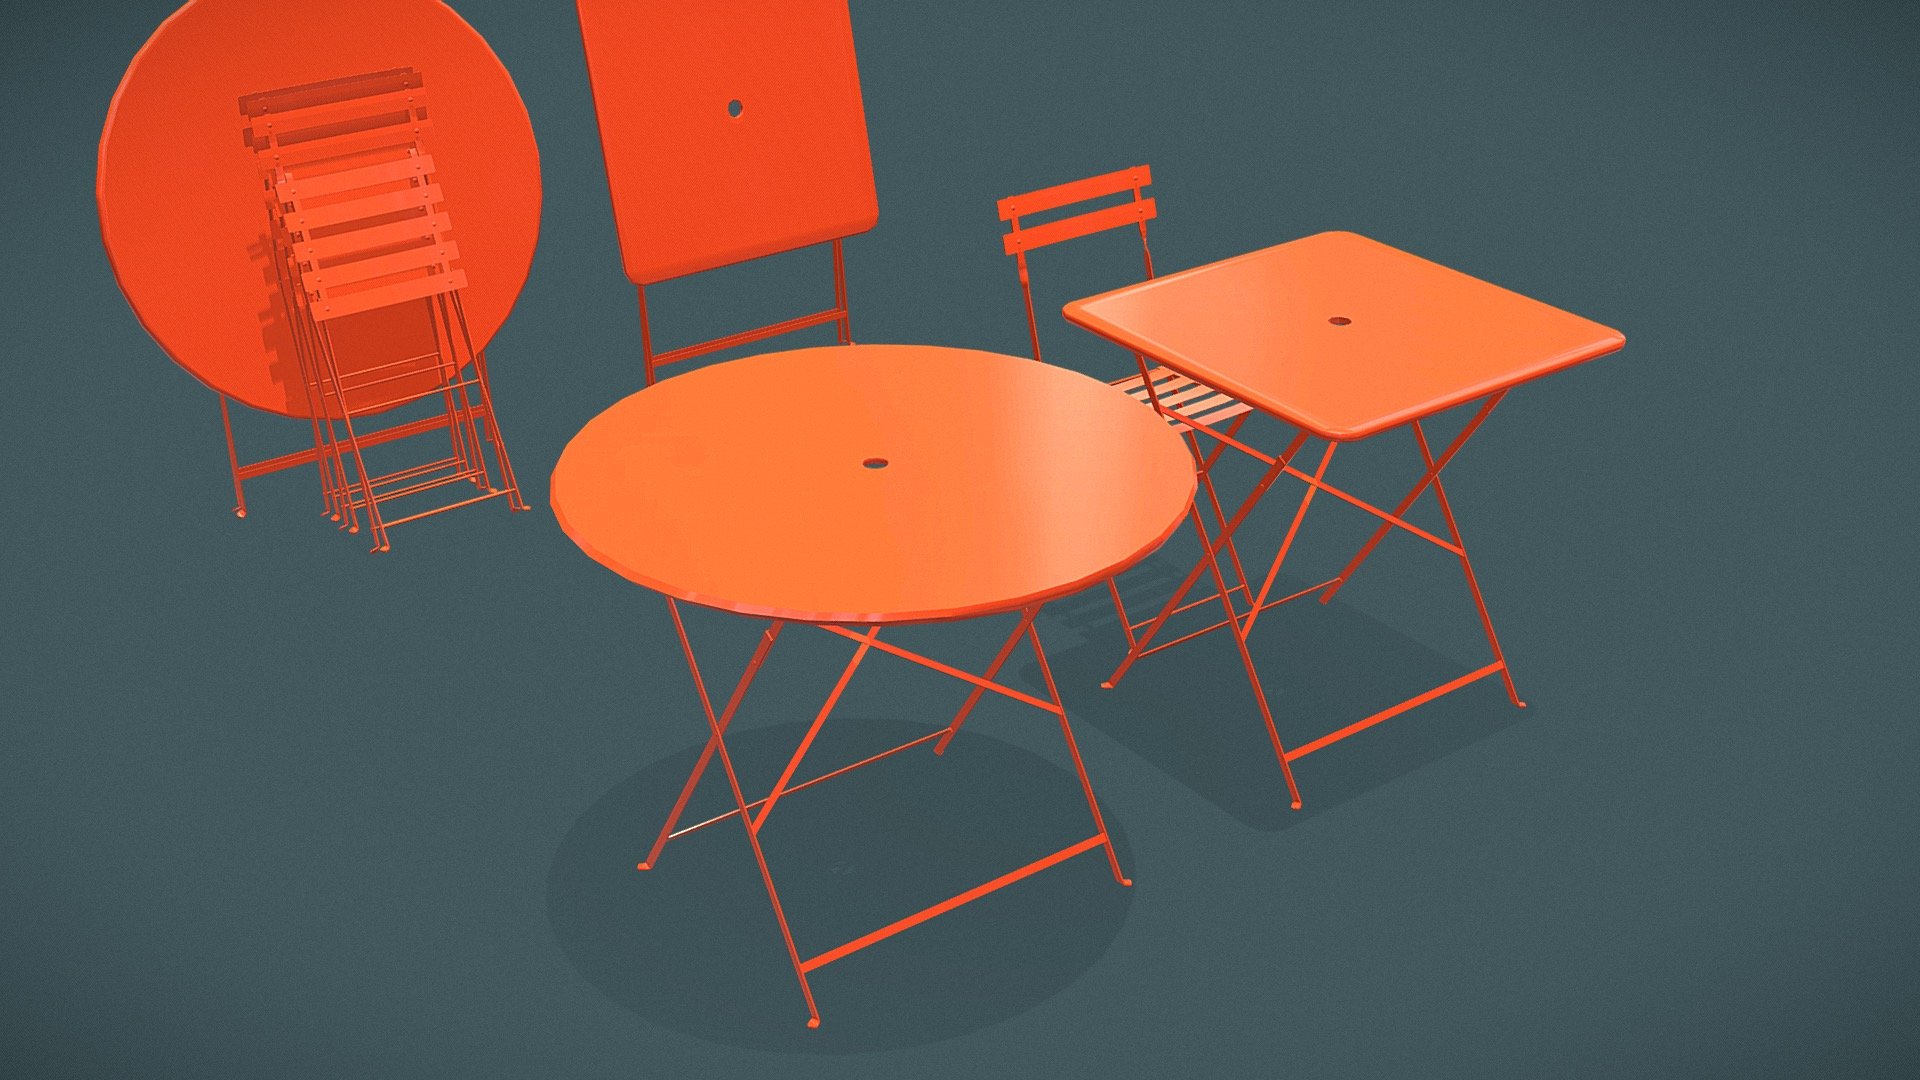 Folding metallic tables and chairs.
Four table models, square or circular, folded or unfolded.
Two chair models, folded or unfolded.

Model created with Modo 14. 

File formats :




.lxo (modo 14)

.abc

.dae

.blend (Blender 2.9)

.obj

.fbx (2018)
 - Bistrot metal tables and chairs - Buy Royalty Free 3D model by boriscargo 3d model